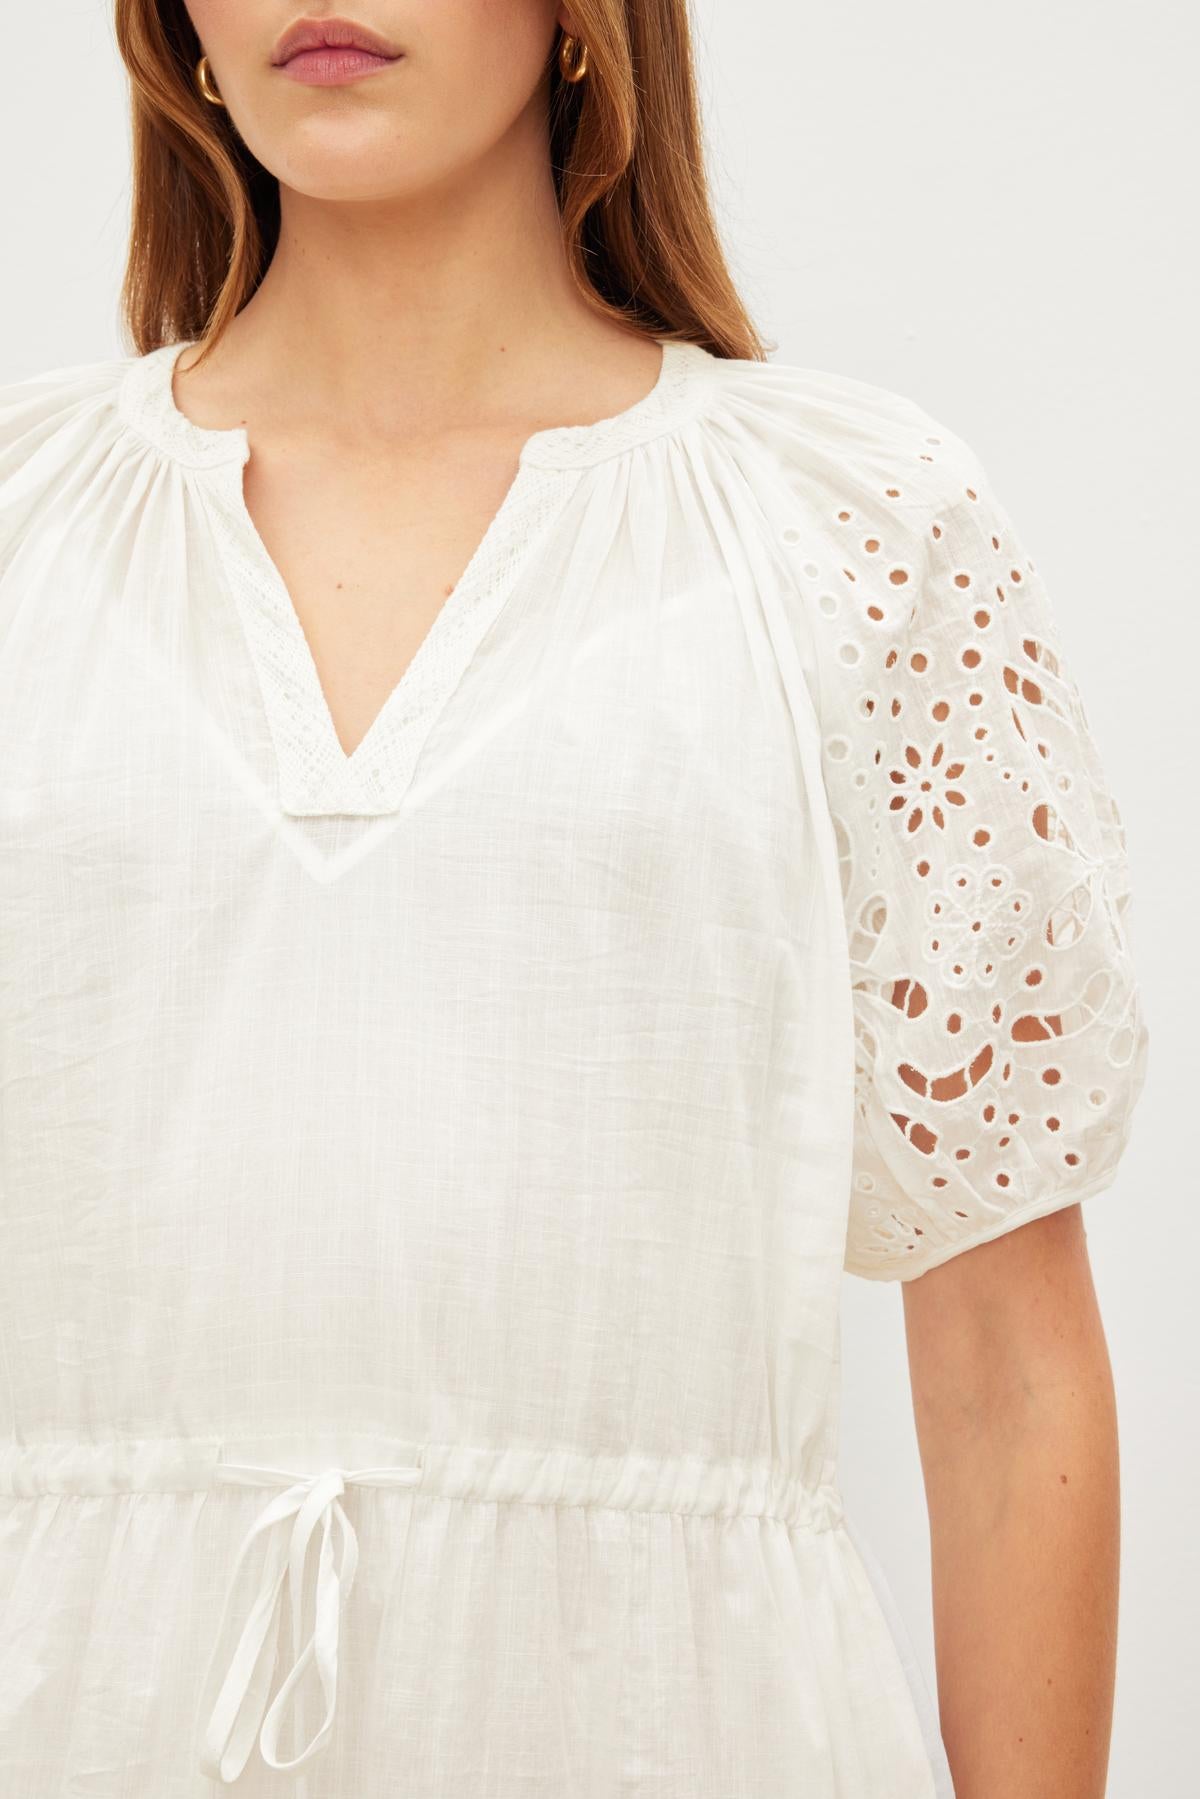 Woman wearing a white NADIA EMBROIDERED COTTON LACE DRESS by Velvet by Graham & Spencer with v-neckline and perforated sleeves, cropped to show from the neck to waist.-36454007636161